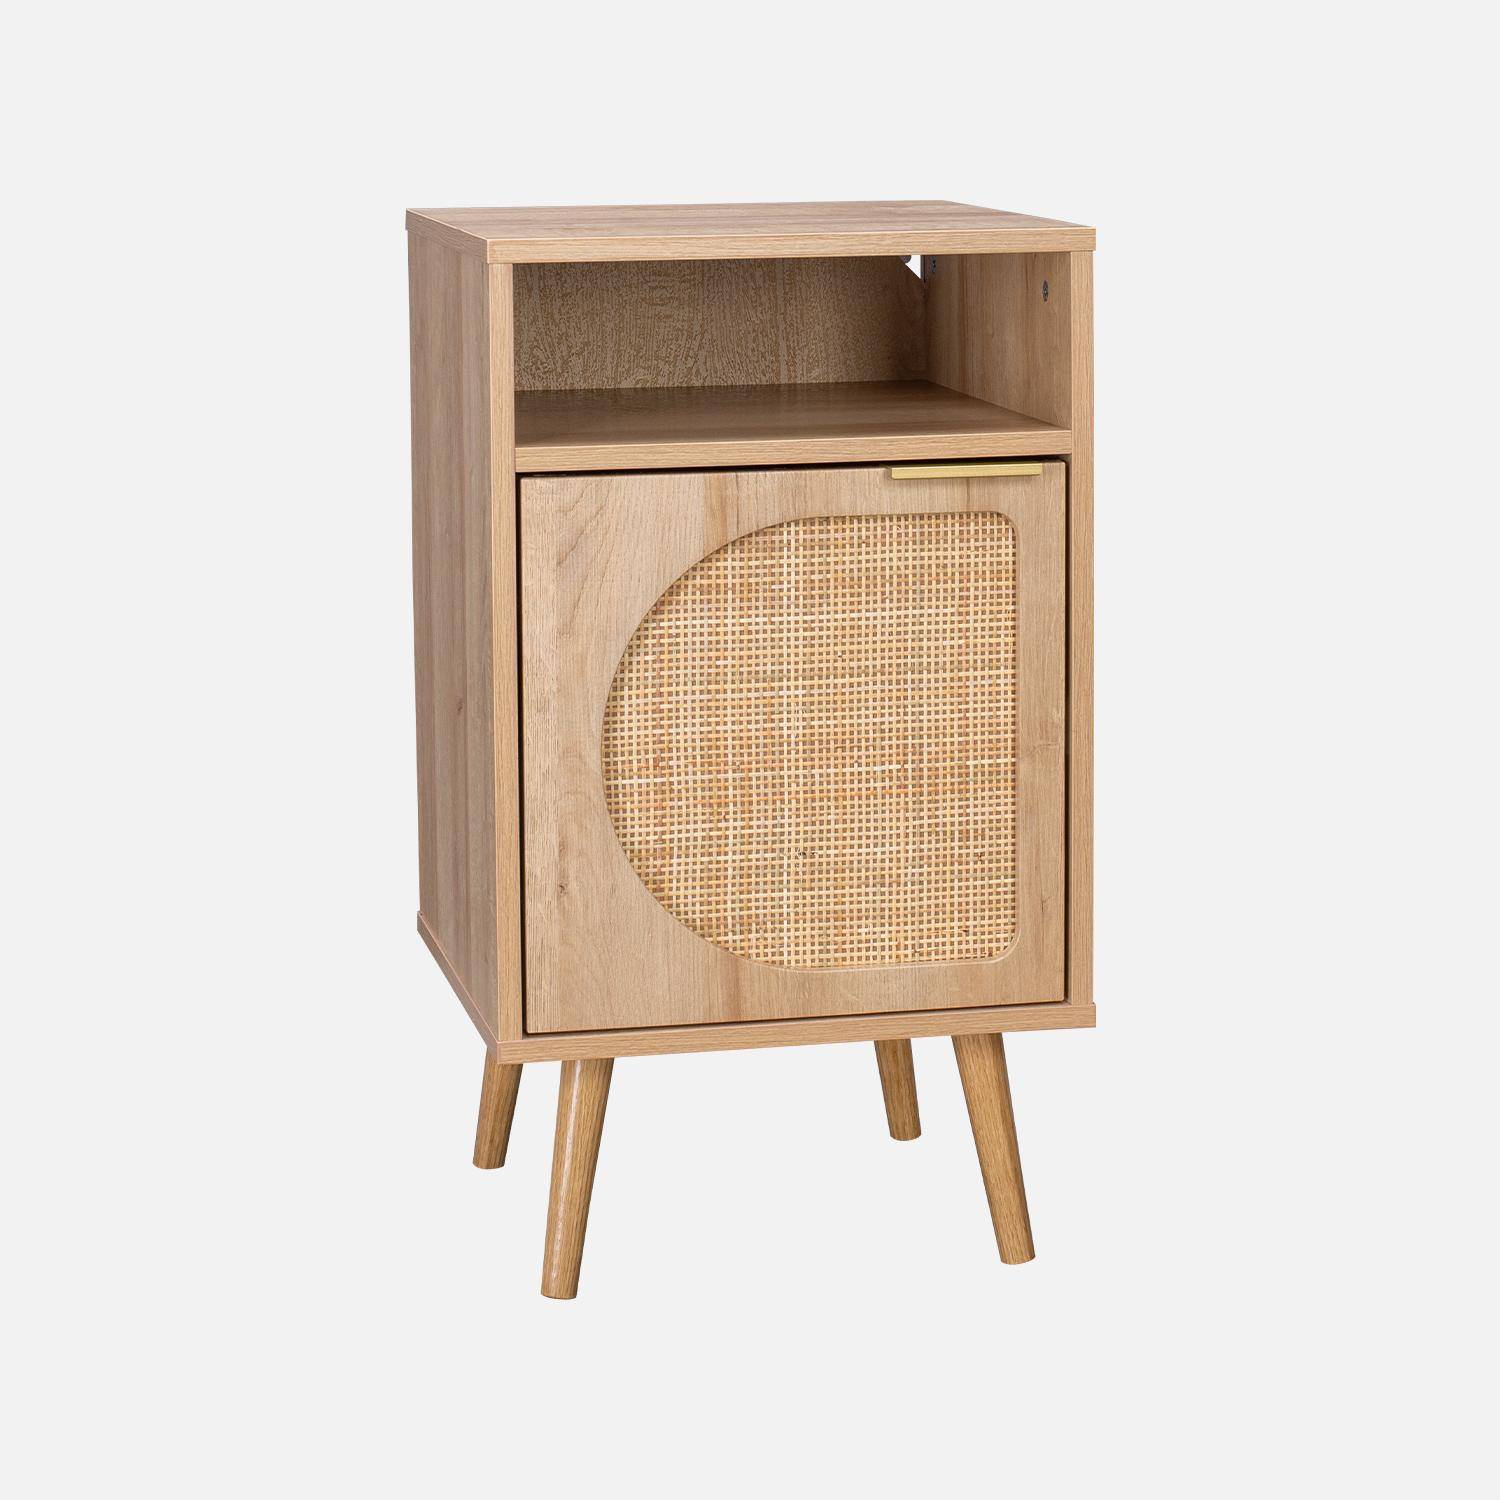 Pair of wood and rounded cane rattan bedside tables, 40x39x65.8cm, Eva, 1 cupboard, 1 storage space each,sweeek,Photo5